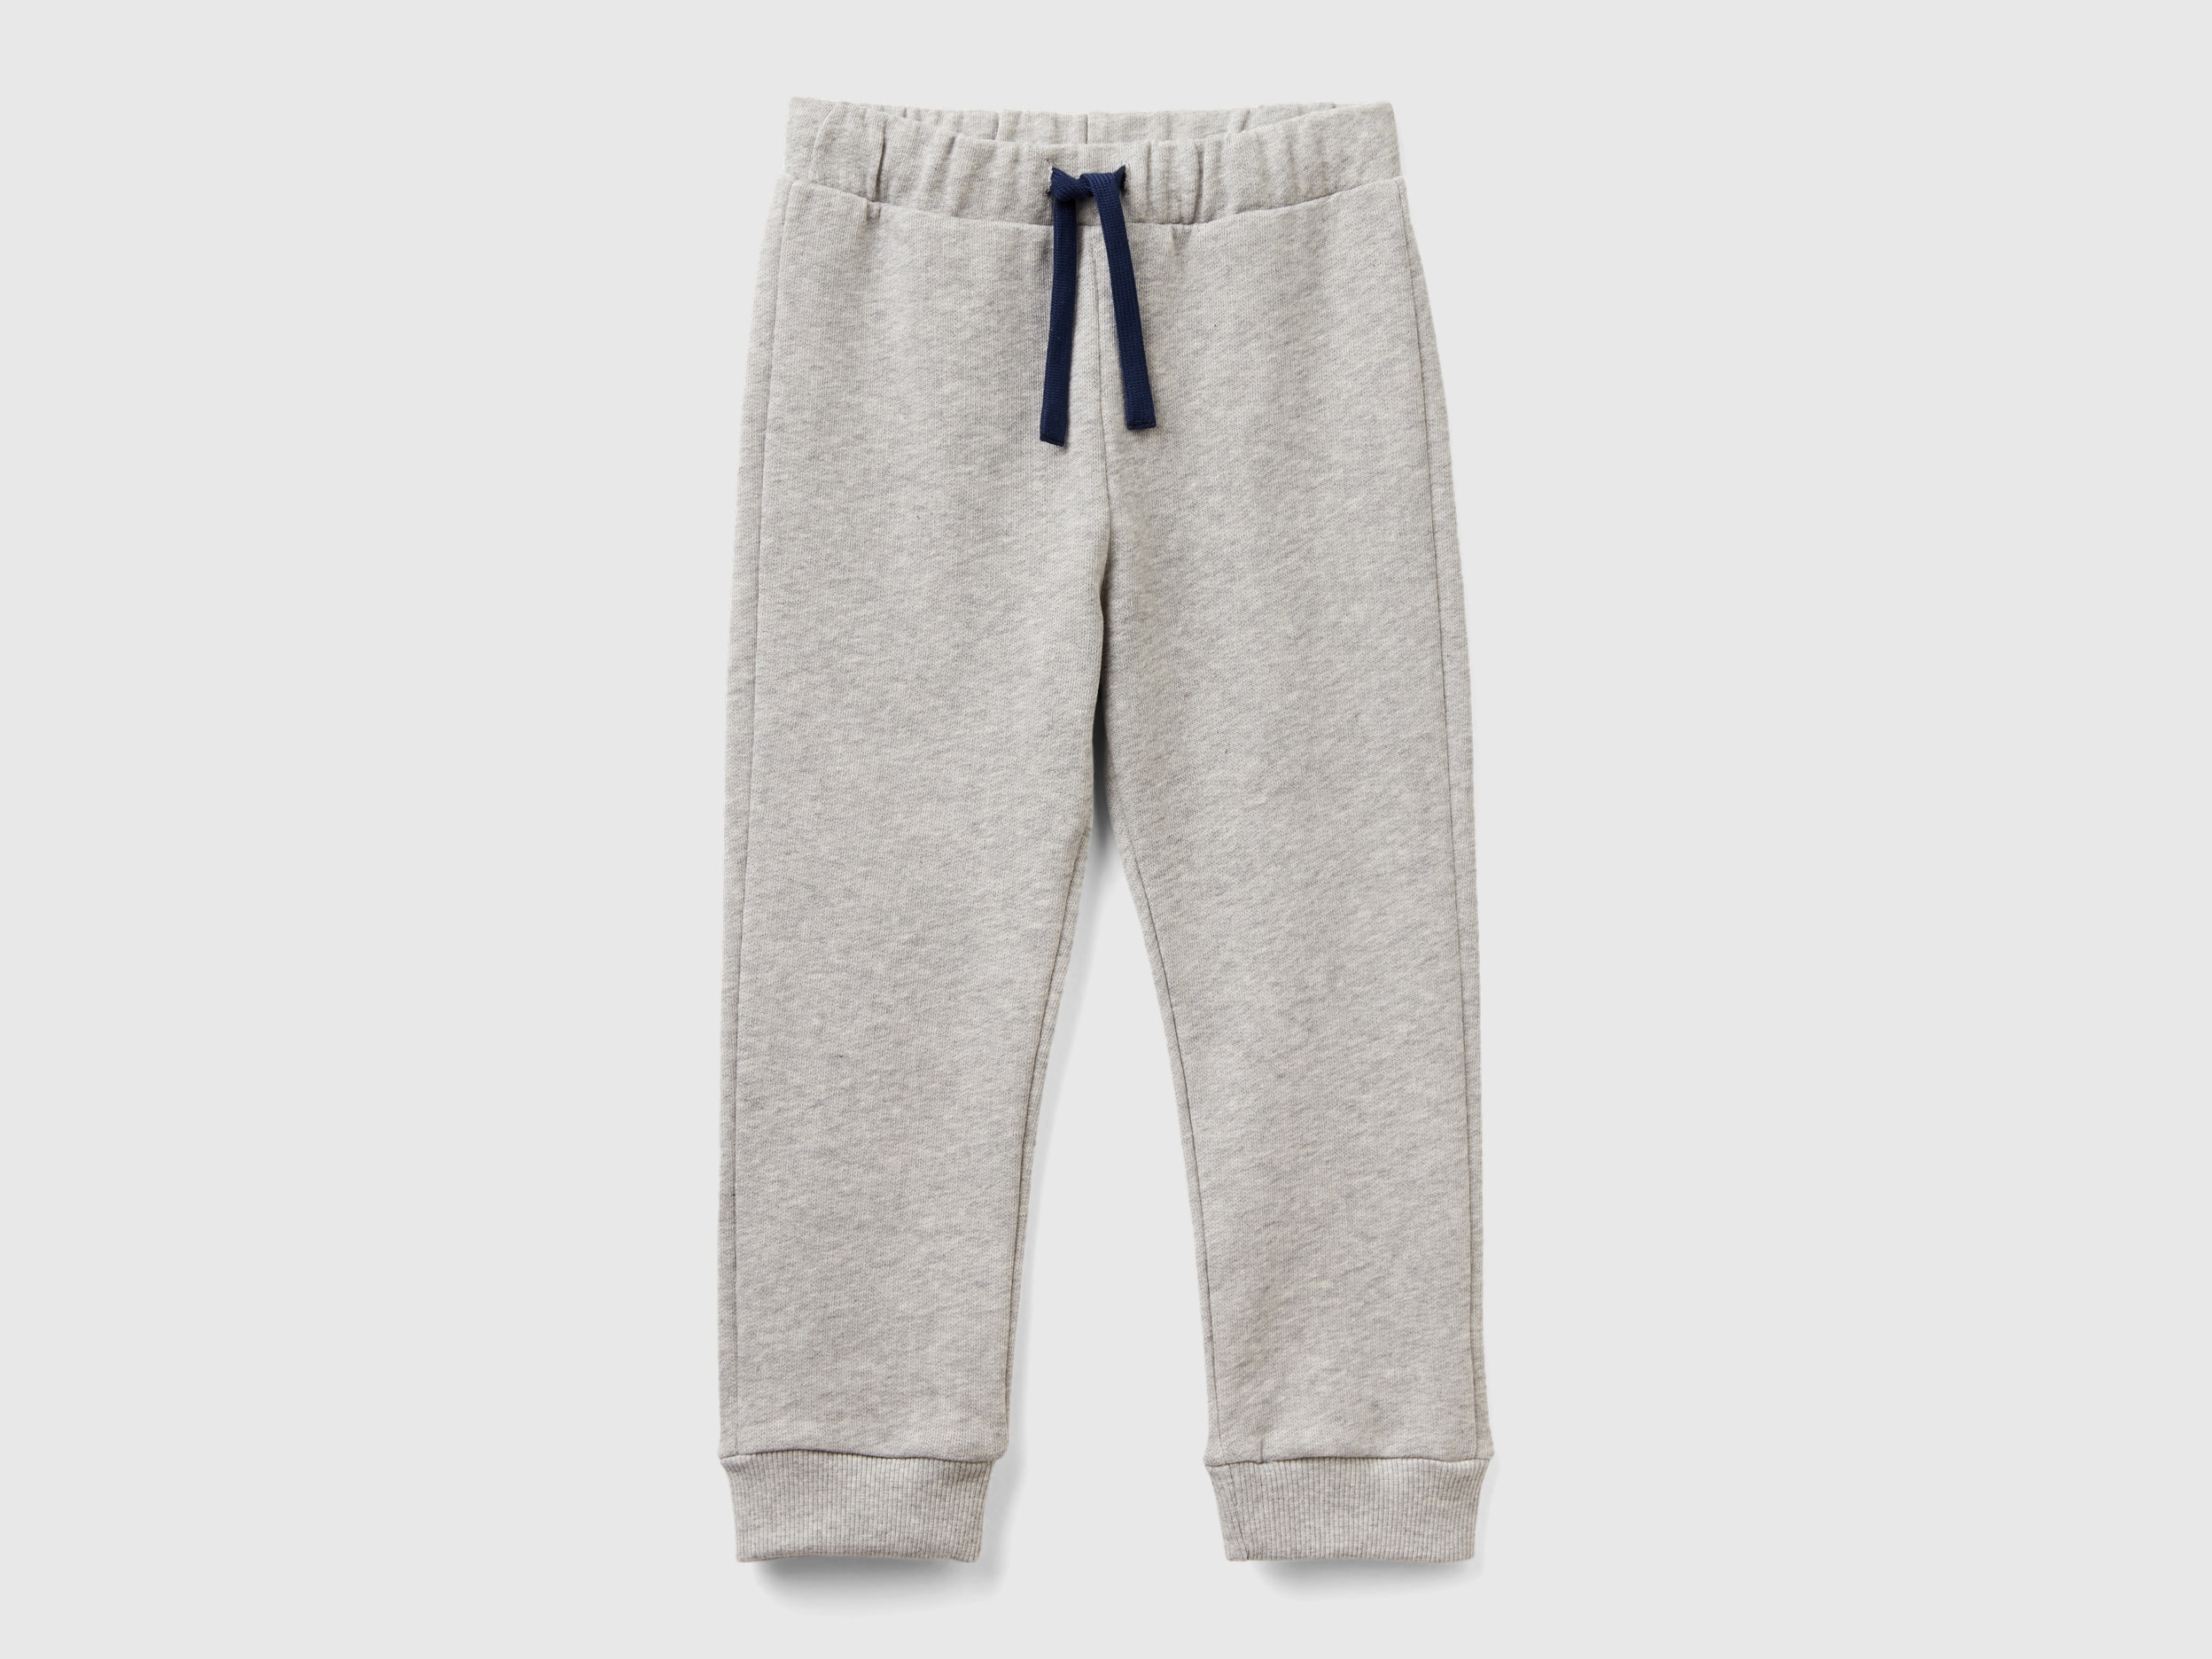 Image of Benetton, Sweatpants With Pocket, size 110, Light Gray, Kids